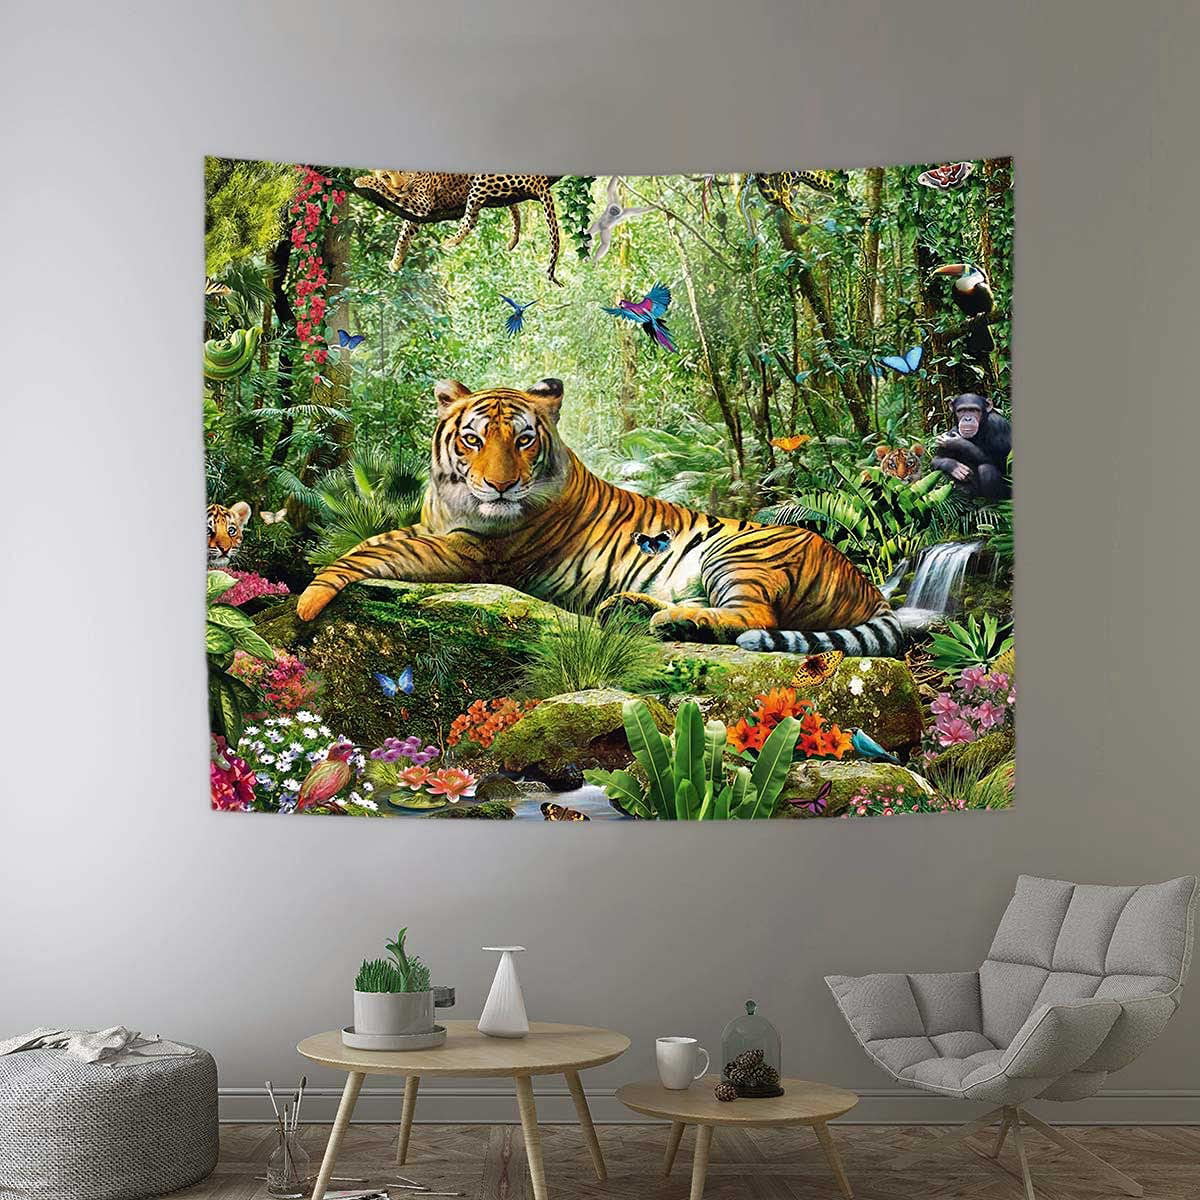 Colourful Polyester Fabric Tapestry Tiger Animal King Wall Hanging Home Decor